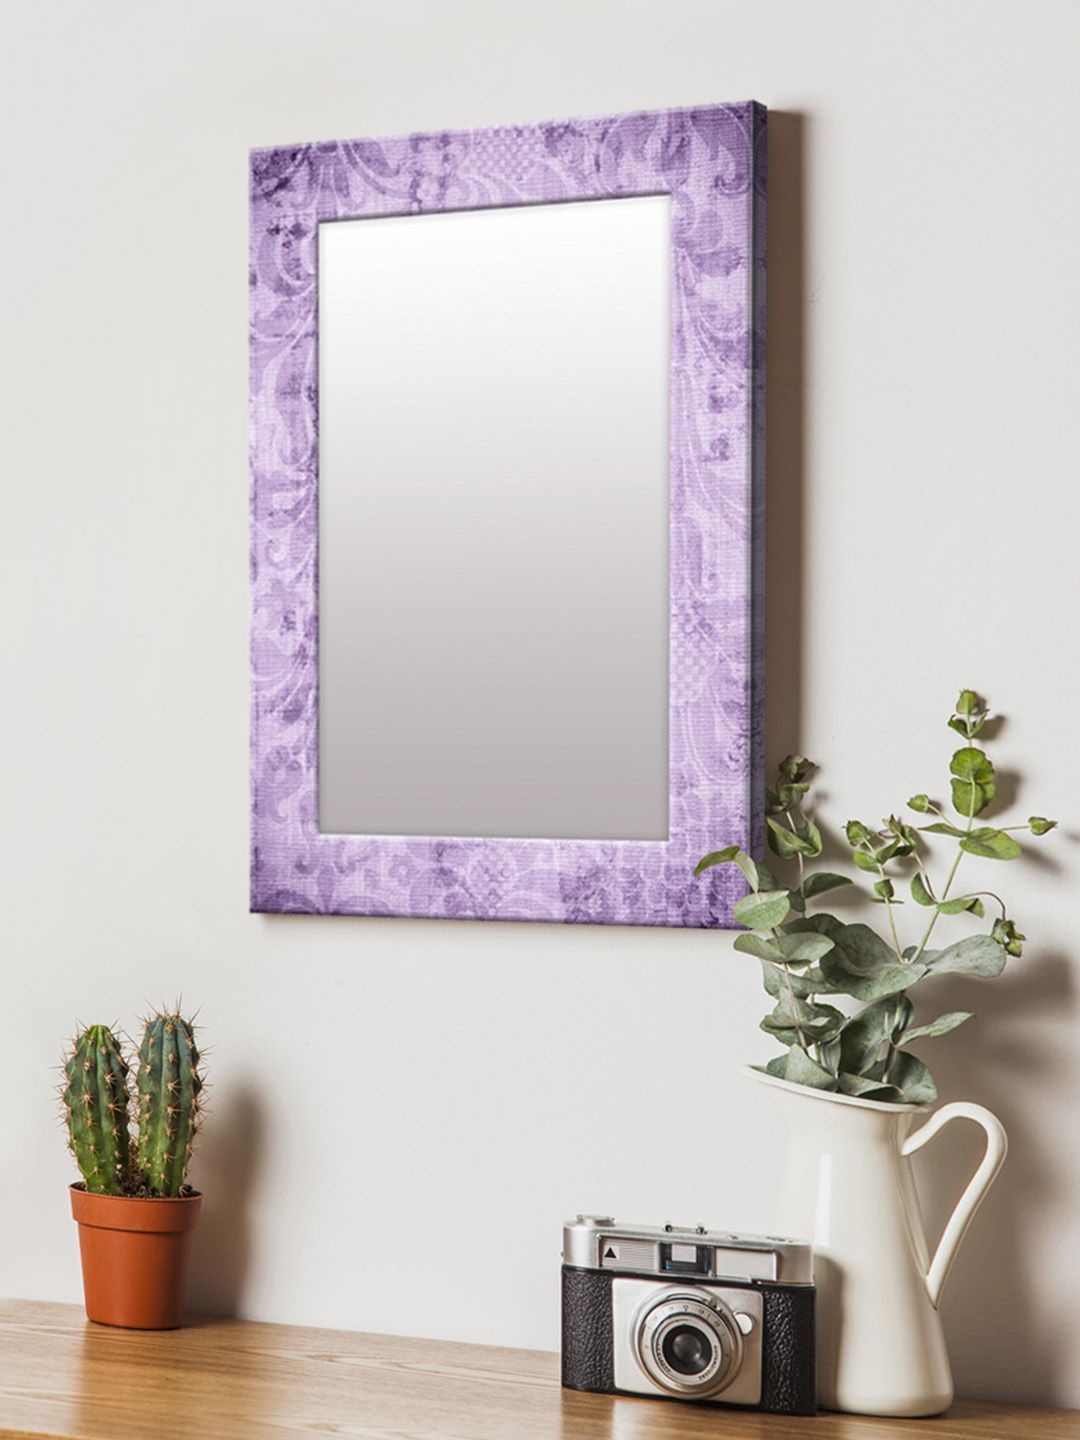 999Store Violet Printed MDF Wall Mirror Price in India